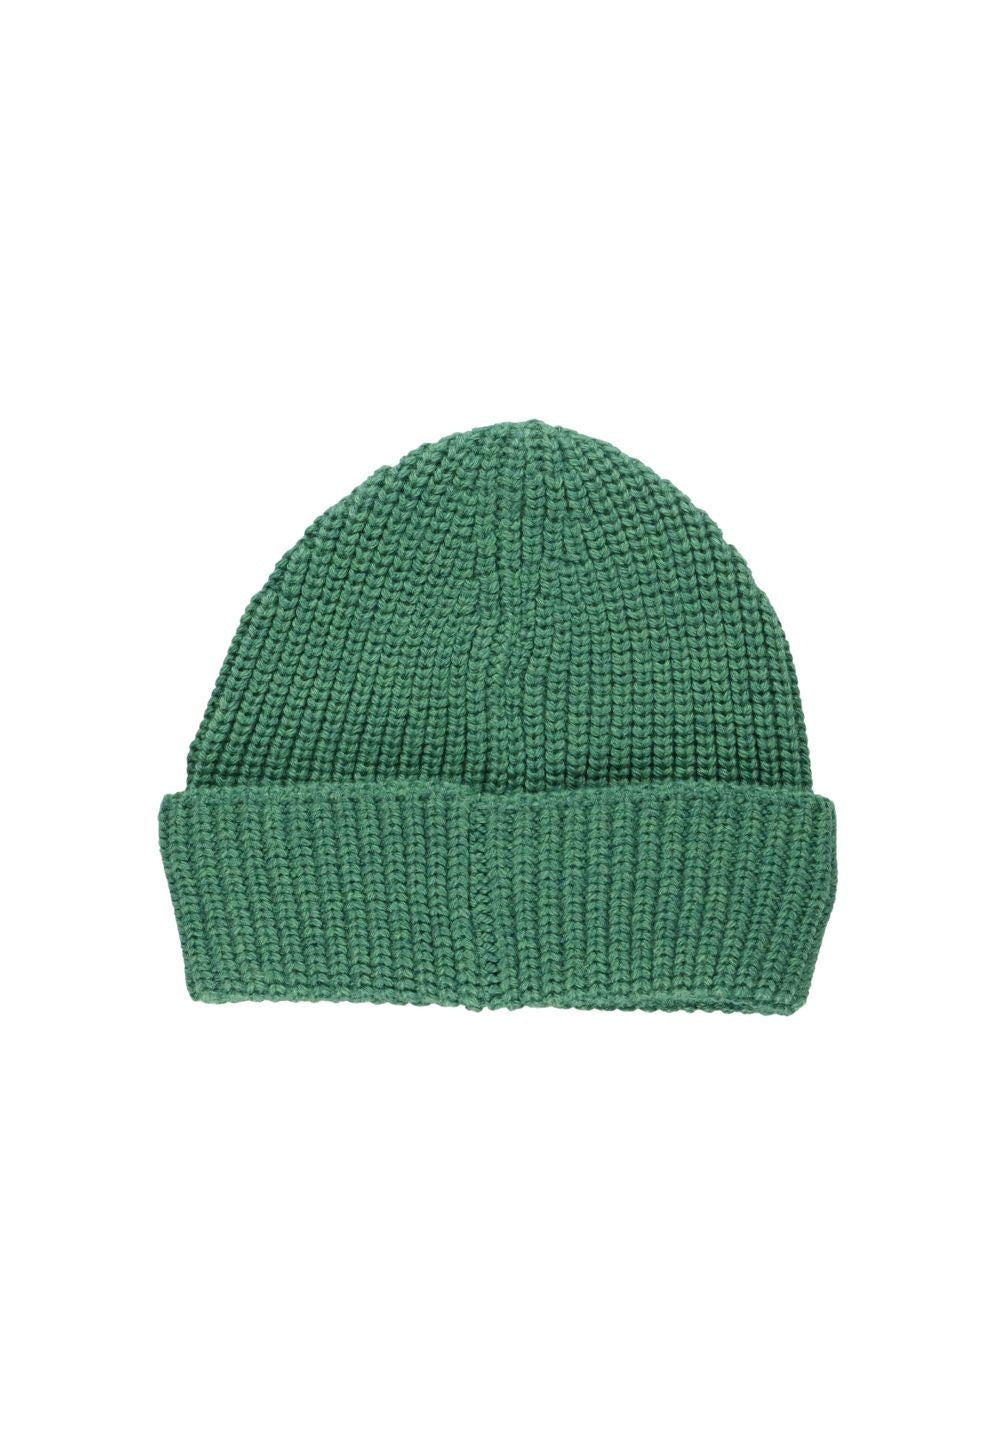 Green hat for child